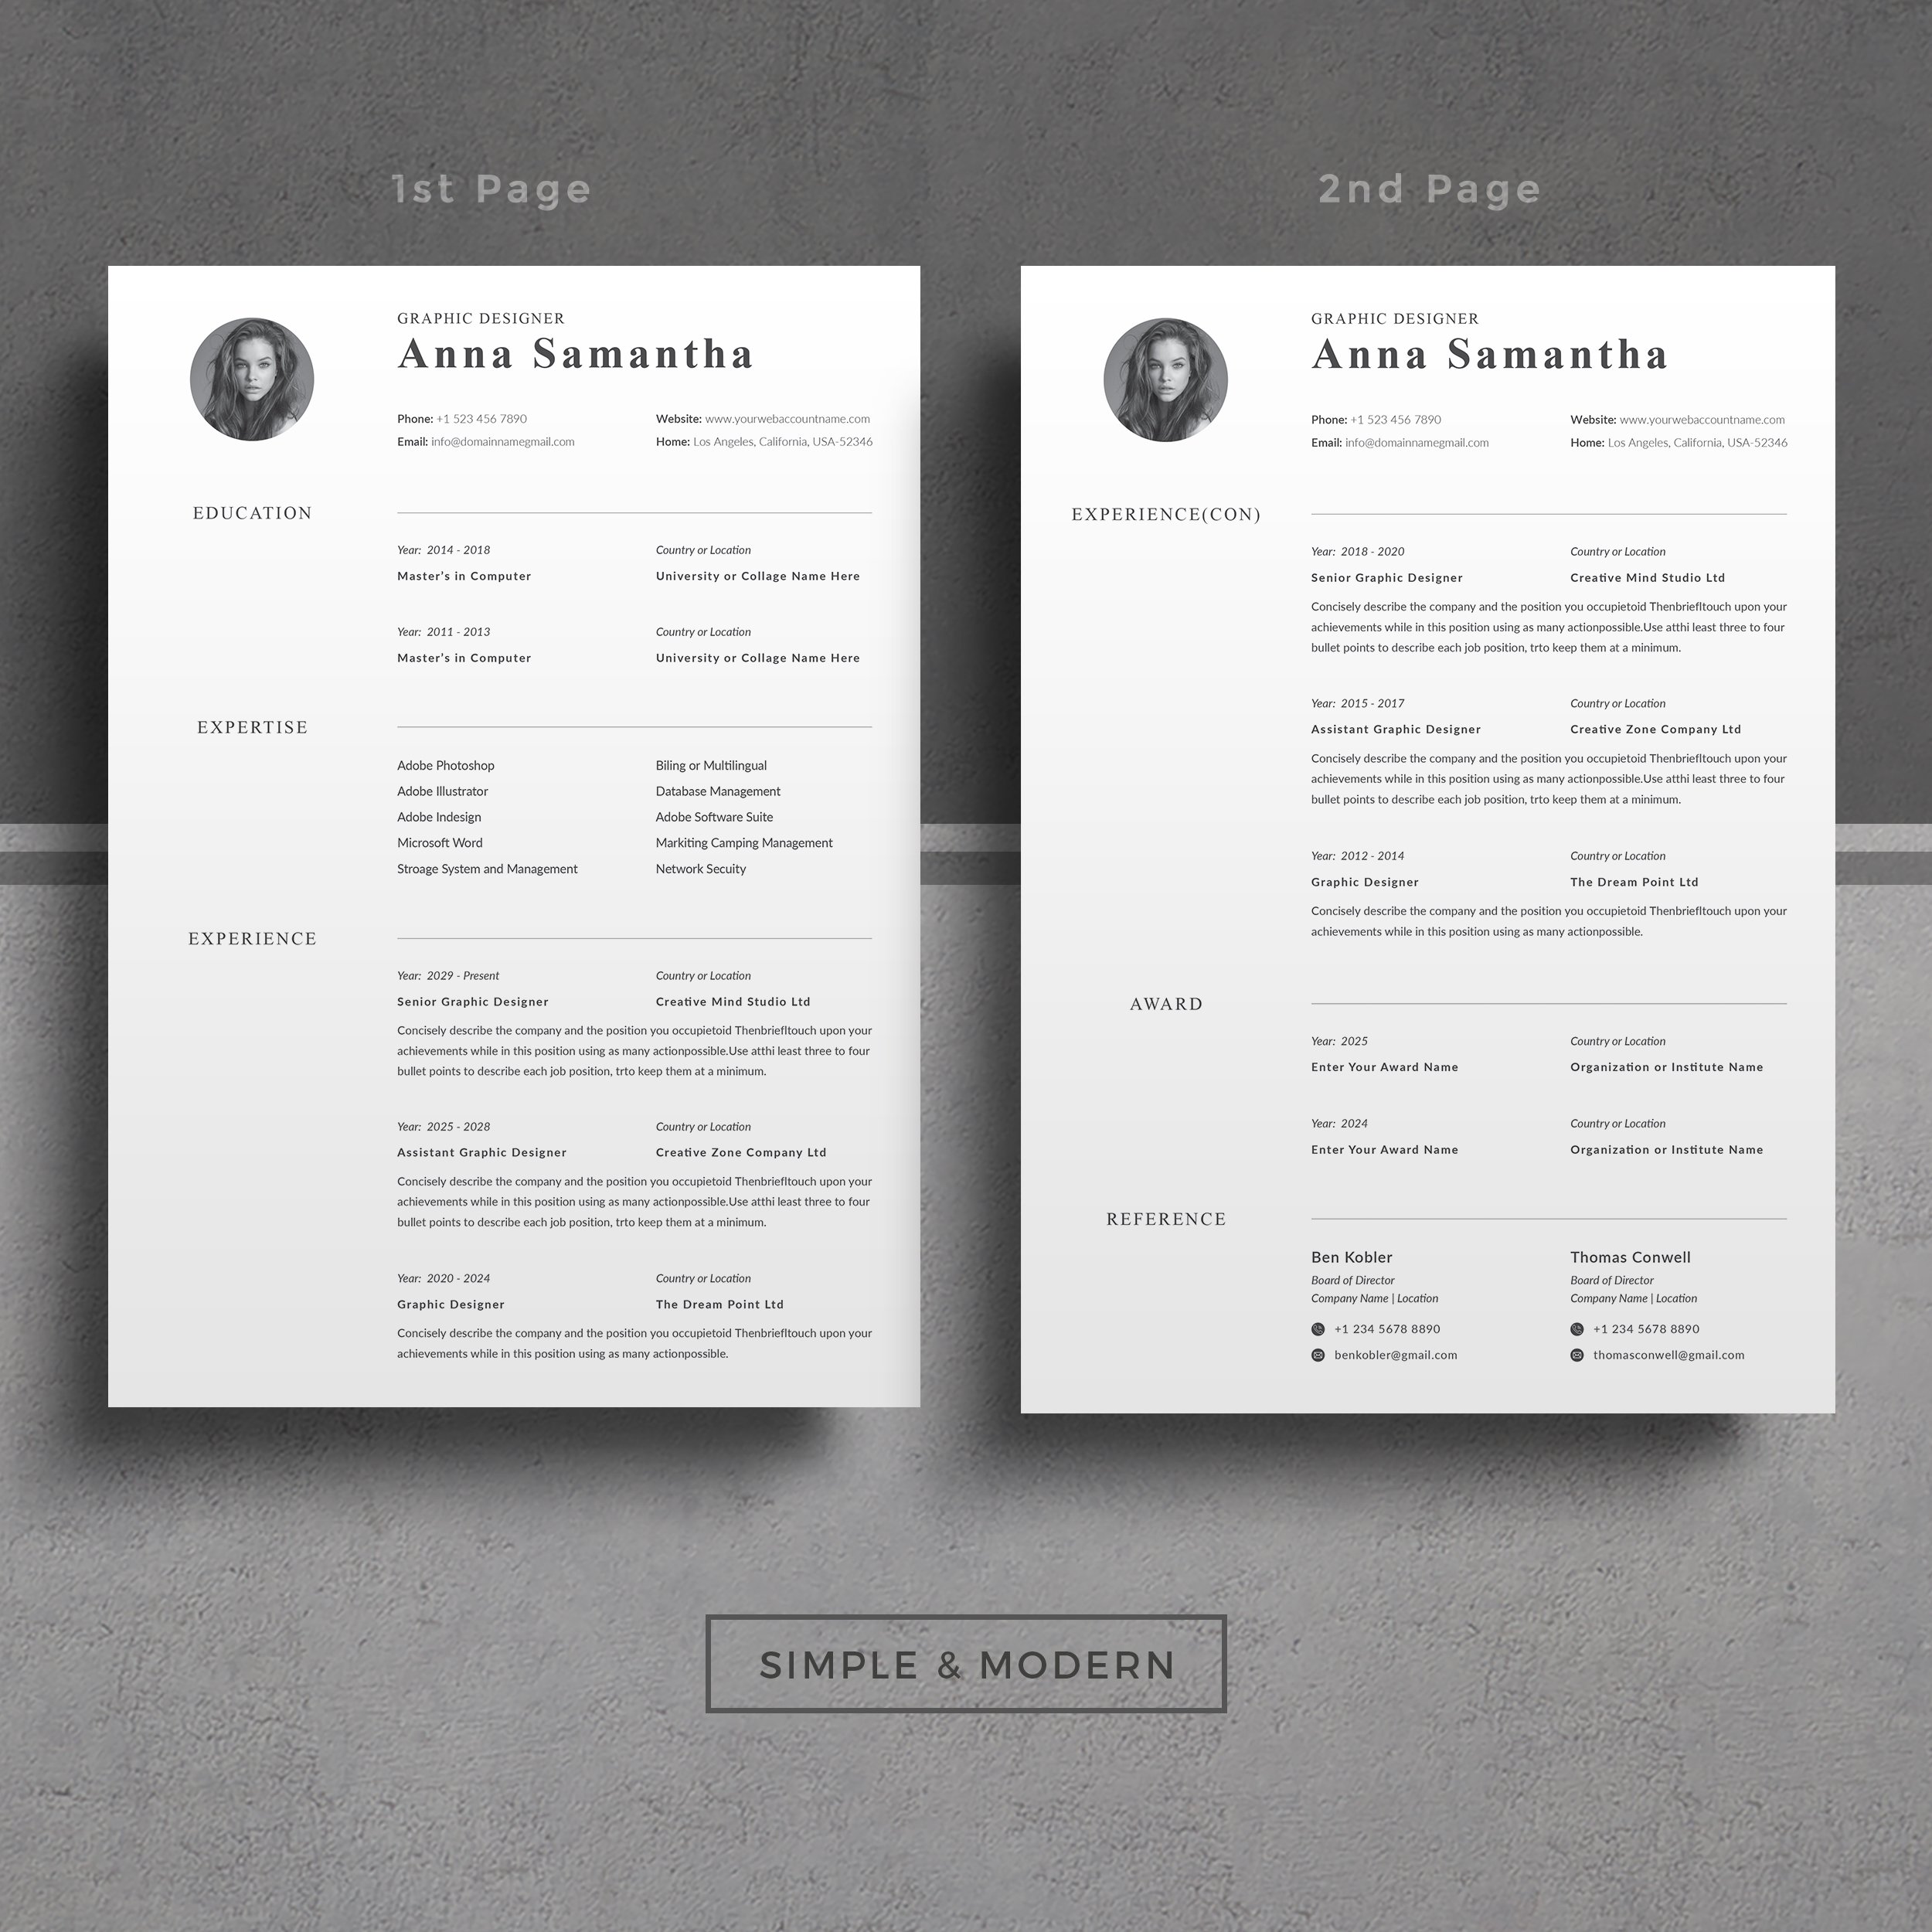 Resume/CV Word 3 page preview image.